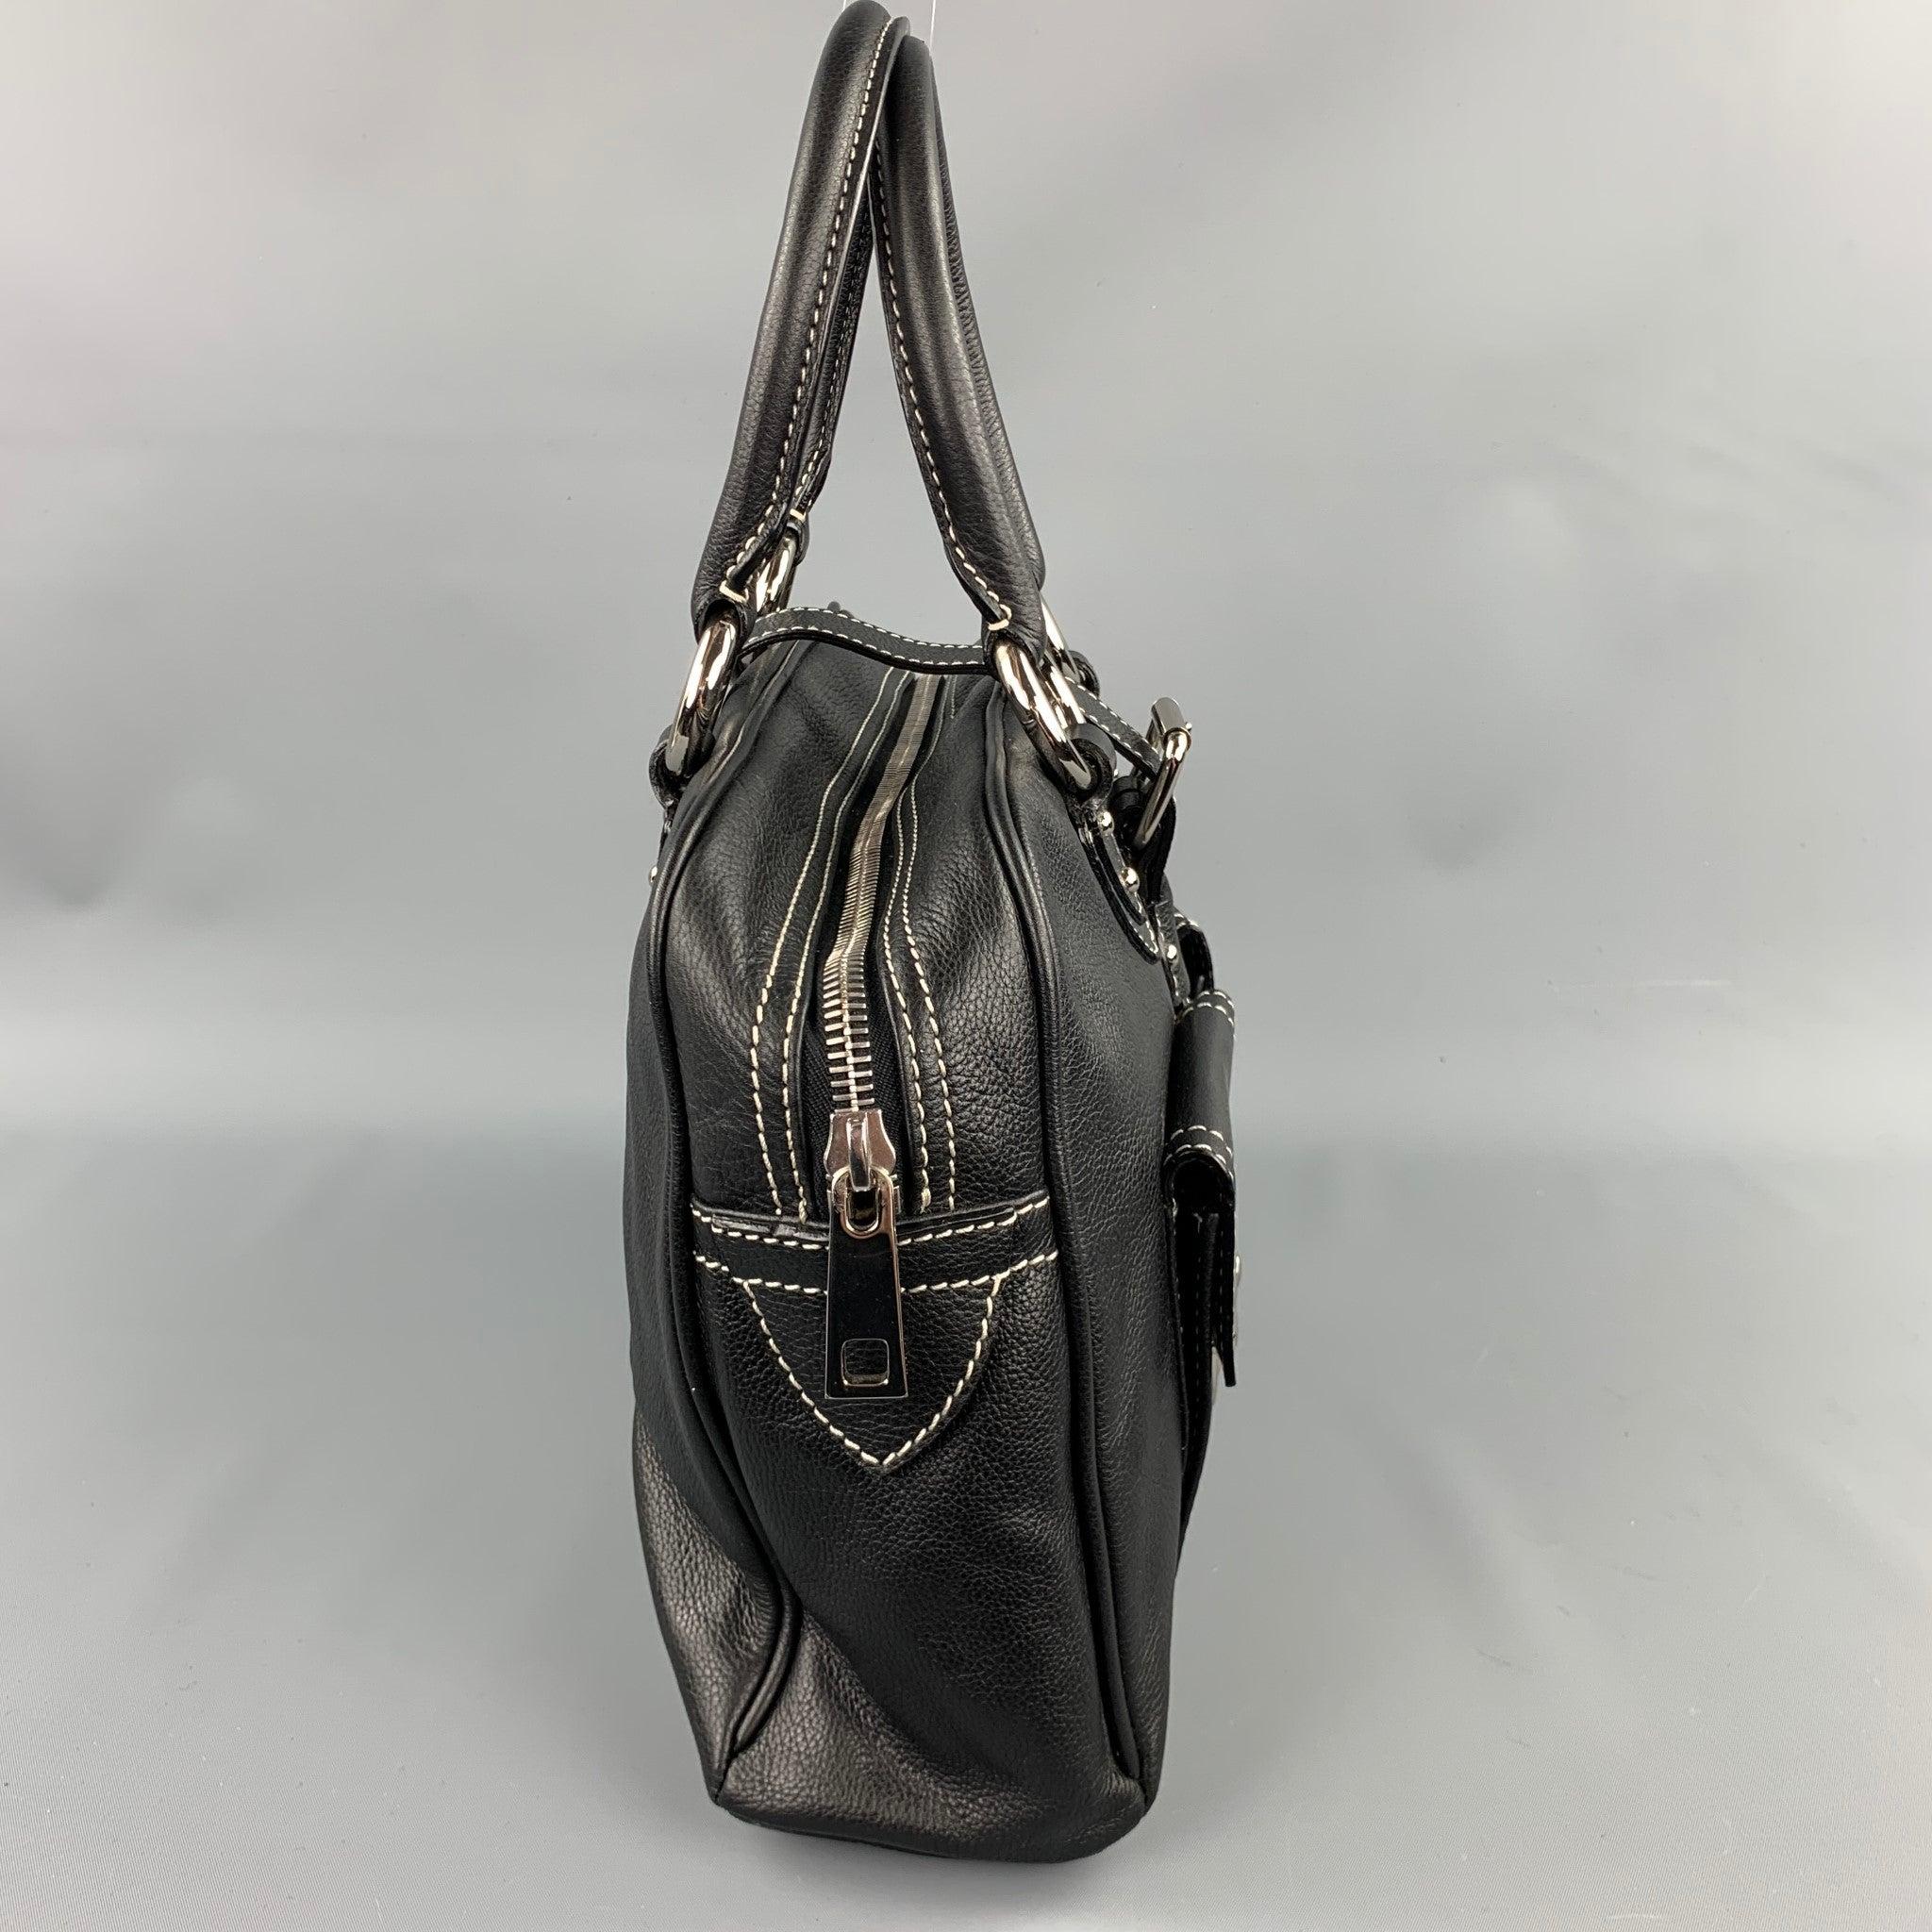 MARC JACOBS Black Contrast Stitching Leather Top Handles Handbag In Good Condition For Sale In San Francisco, CA